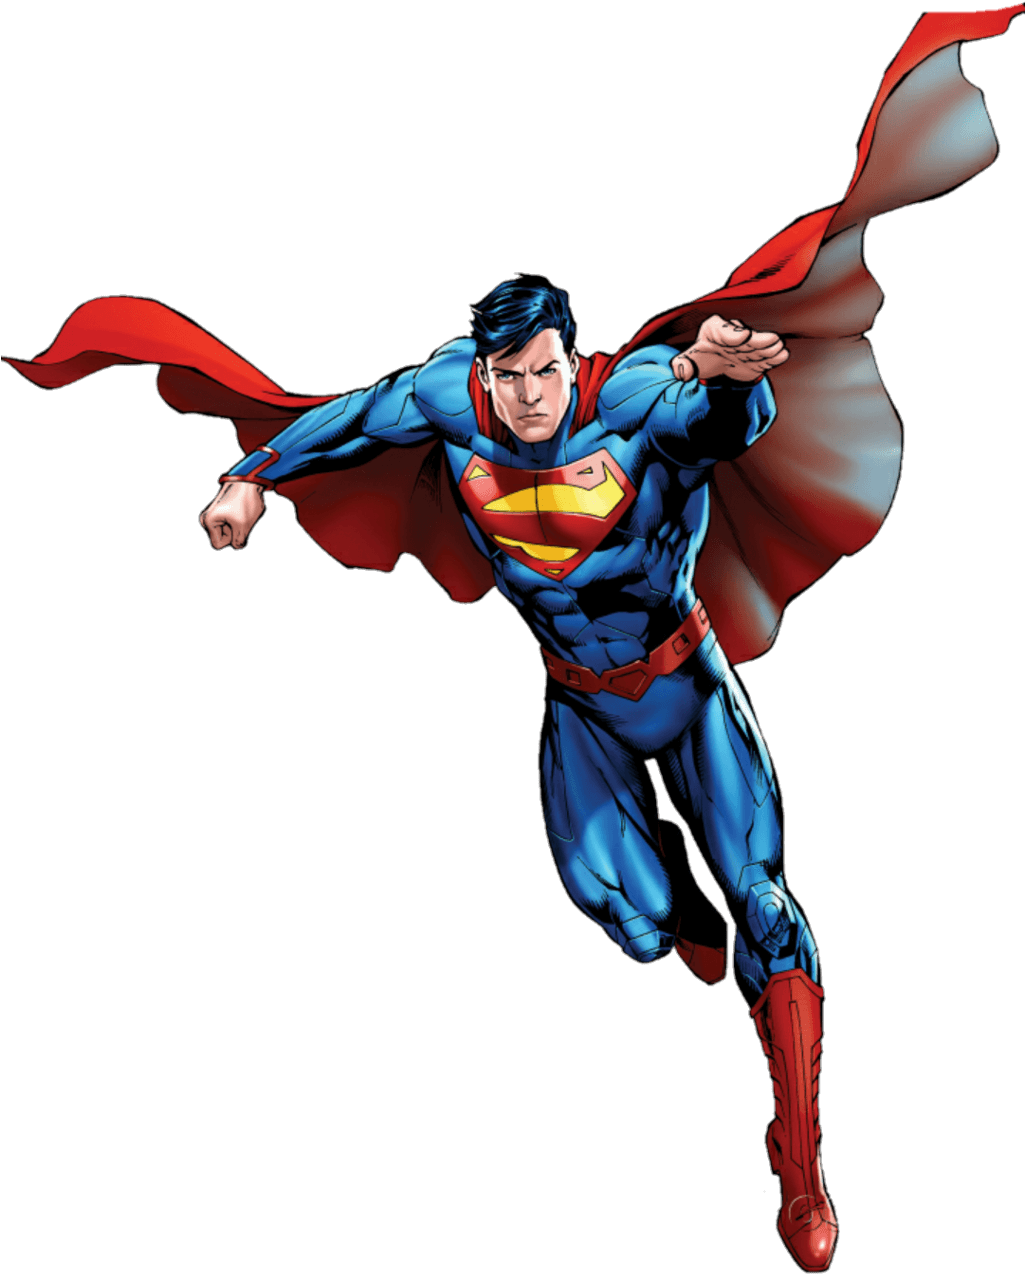 Sporty Young Man Doing a Flying Superman Pose Stock Image - Image of funny,  hope: 137640527